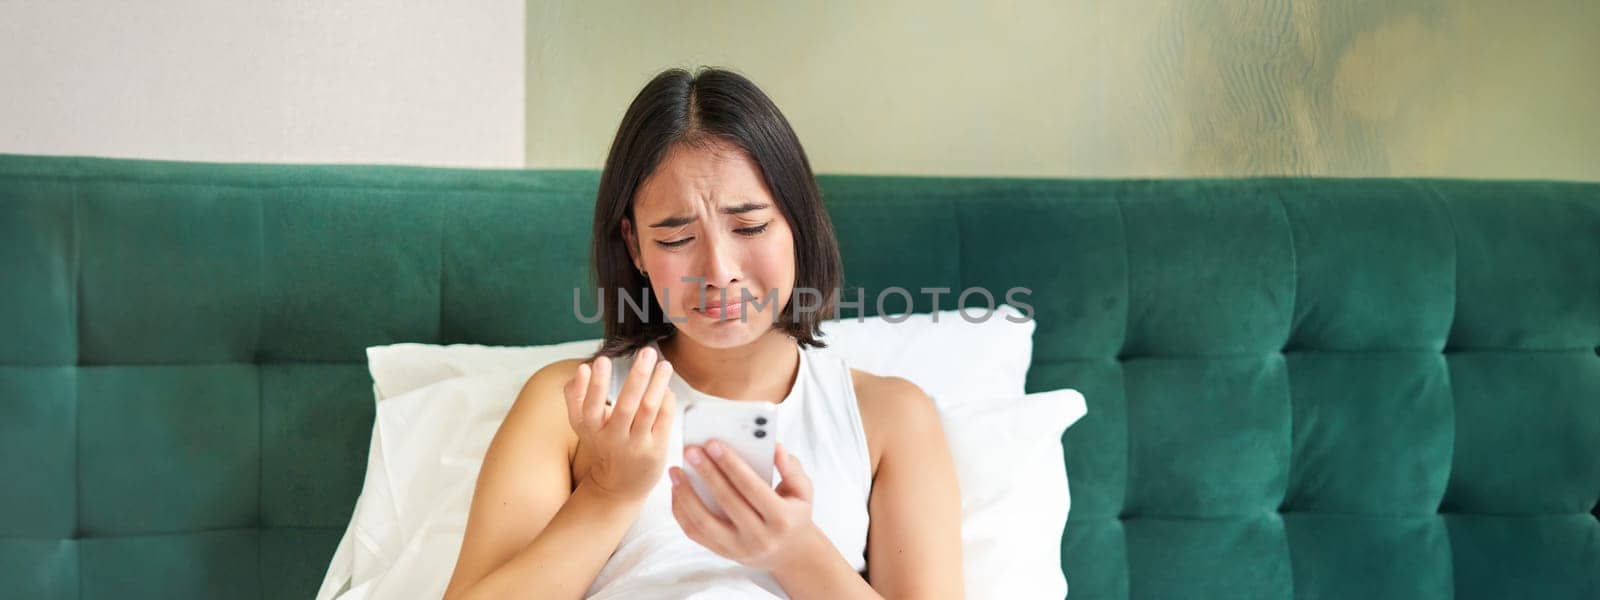 Portrait of sad frowning korean girl, lying in bed and looking at smartphone with upset, disappointed face expression, using mobile phone, complaining.